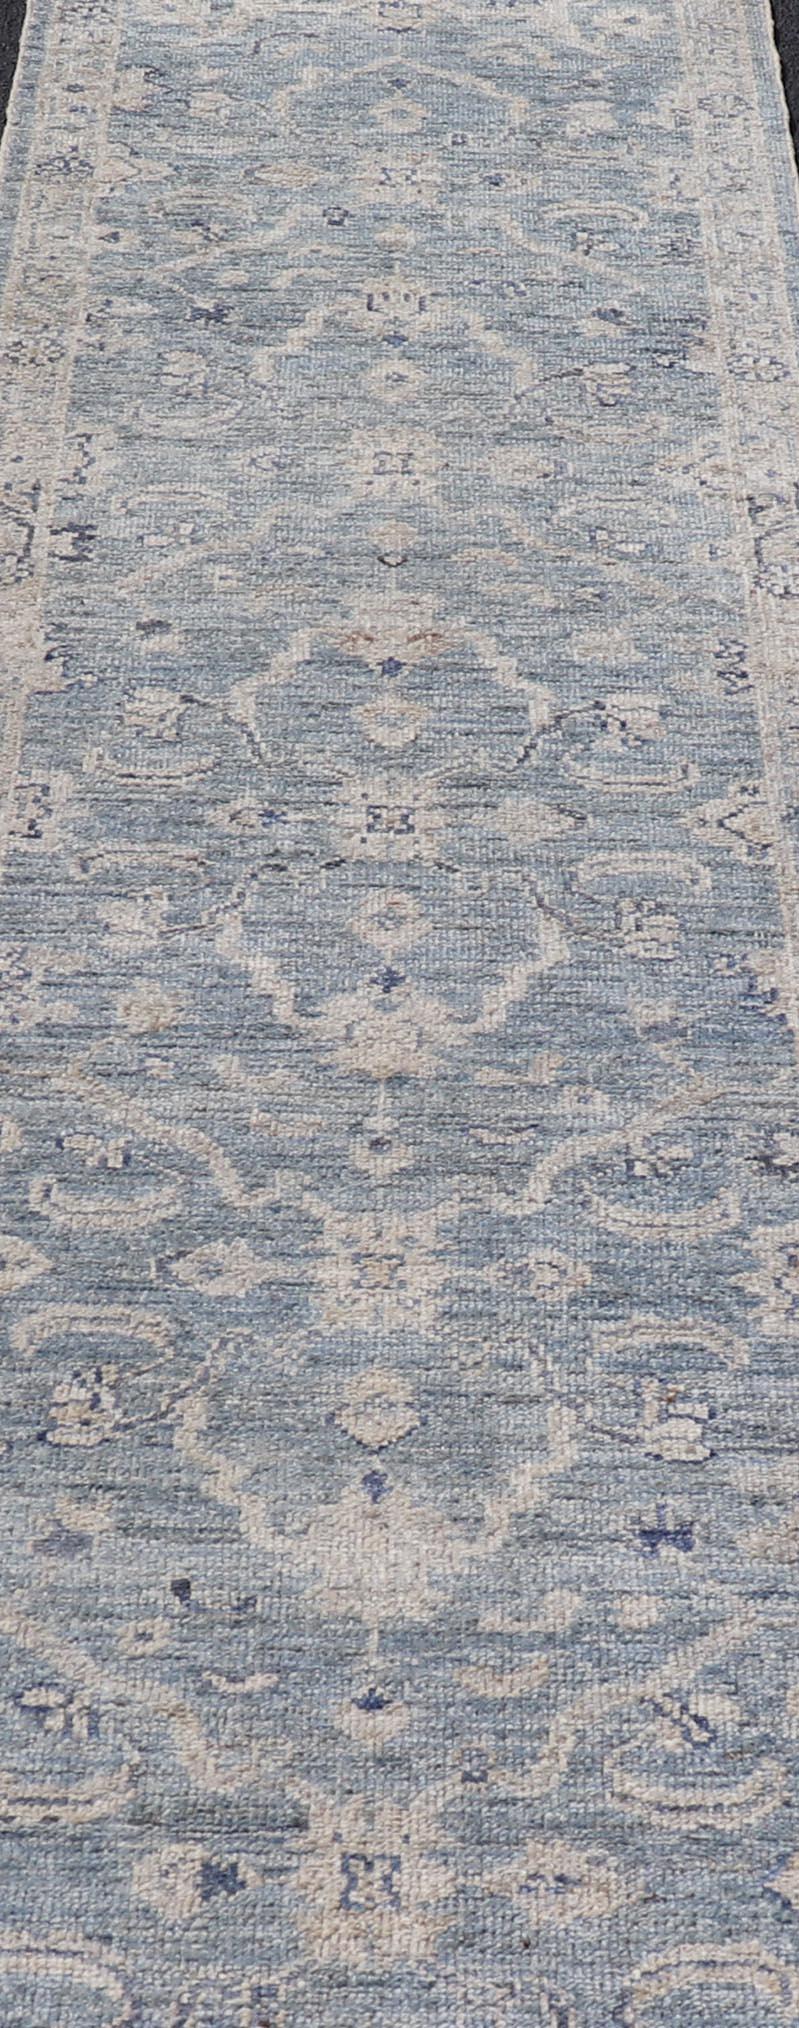 Wool Angora Turkish Oushak Runner with Floral Design and Medium Blue and Grey Border For Sale